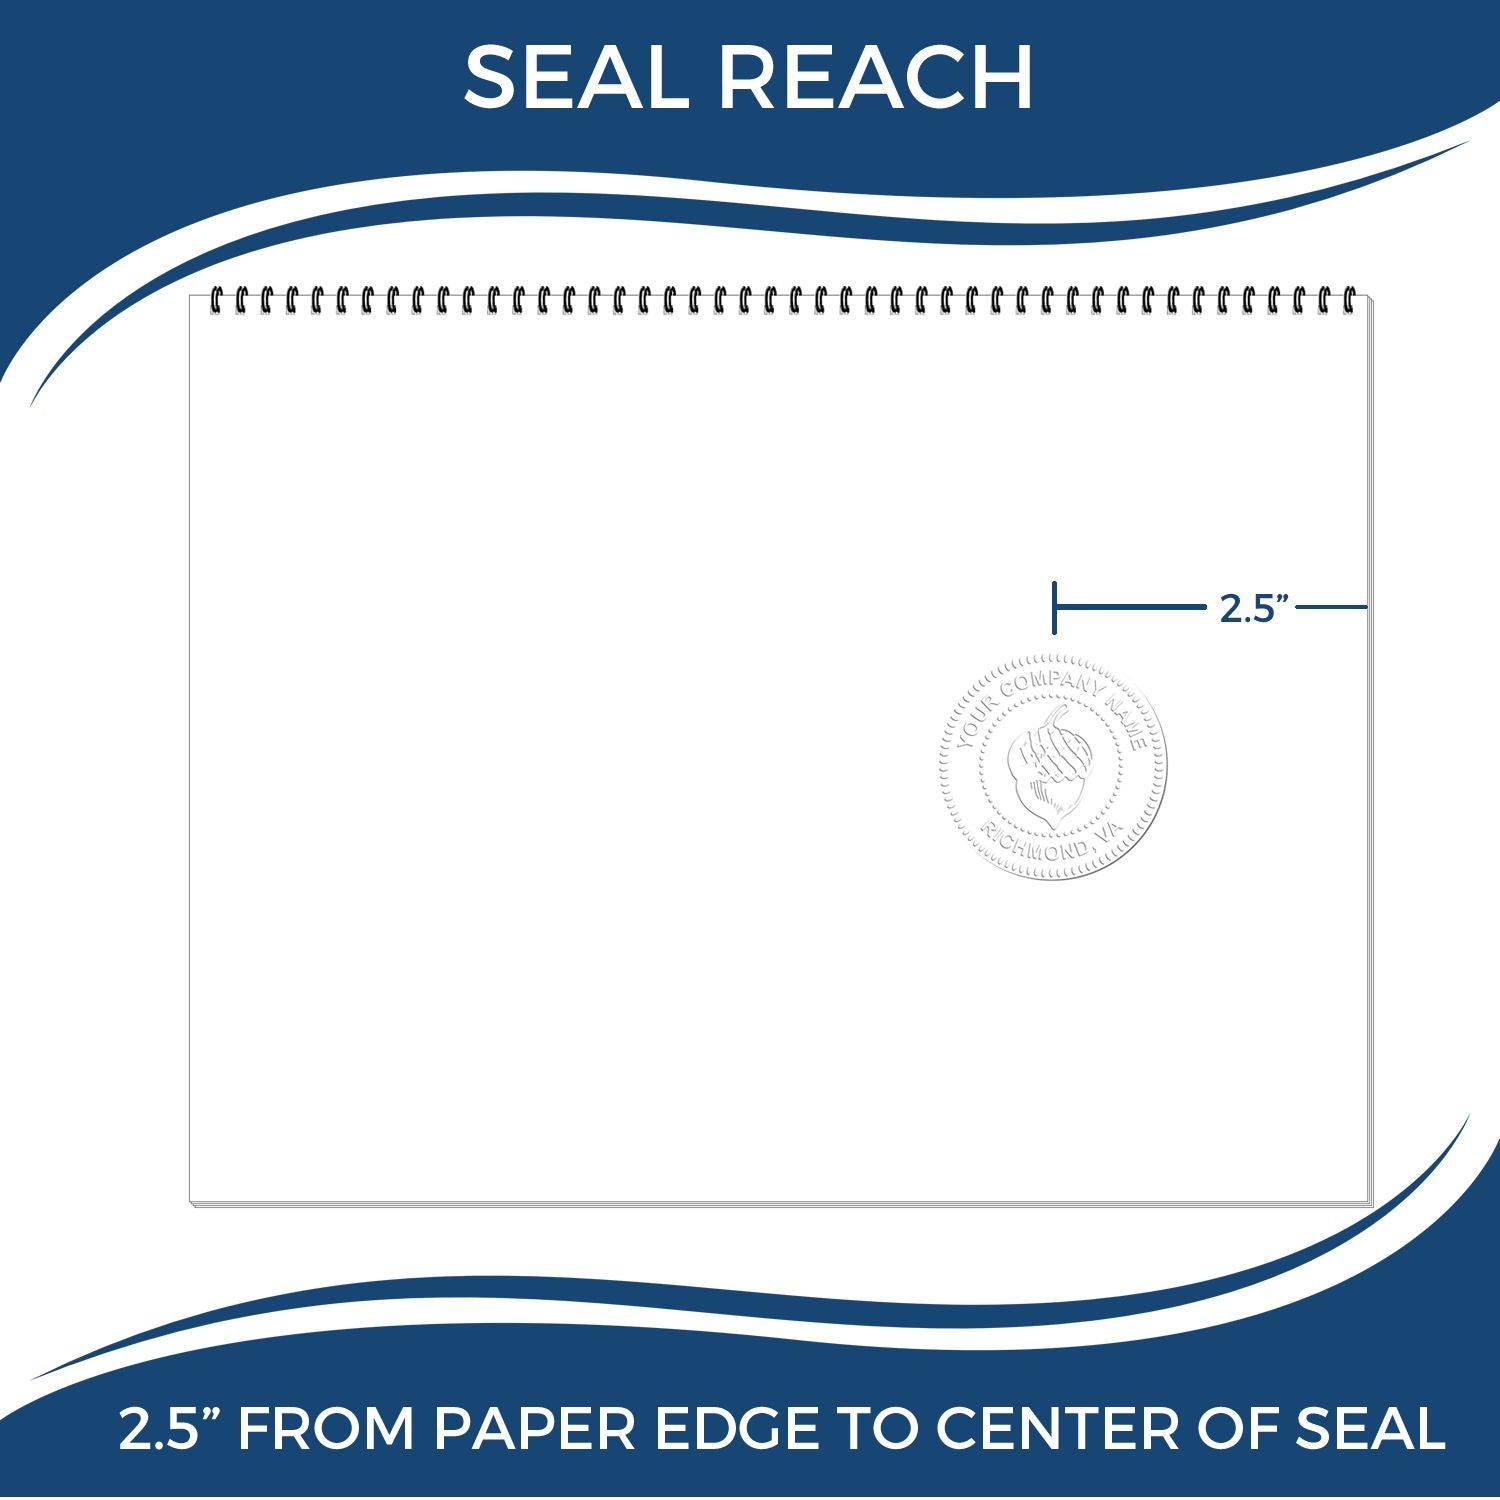 An infographic showing the seal reach which is represented by a ruler and a miniature seal image of the Heavy Duty Cast Iron Utah Engineer Seal Embosser